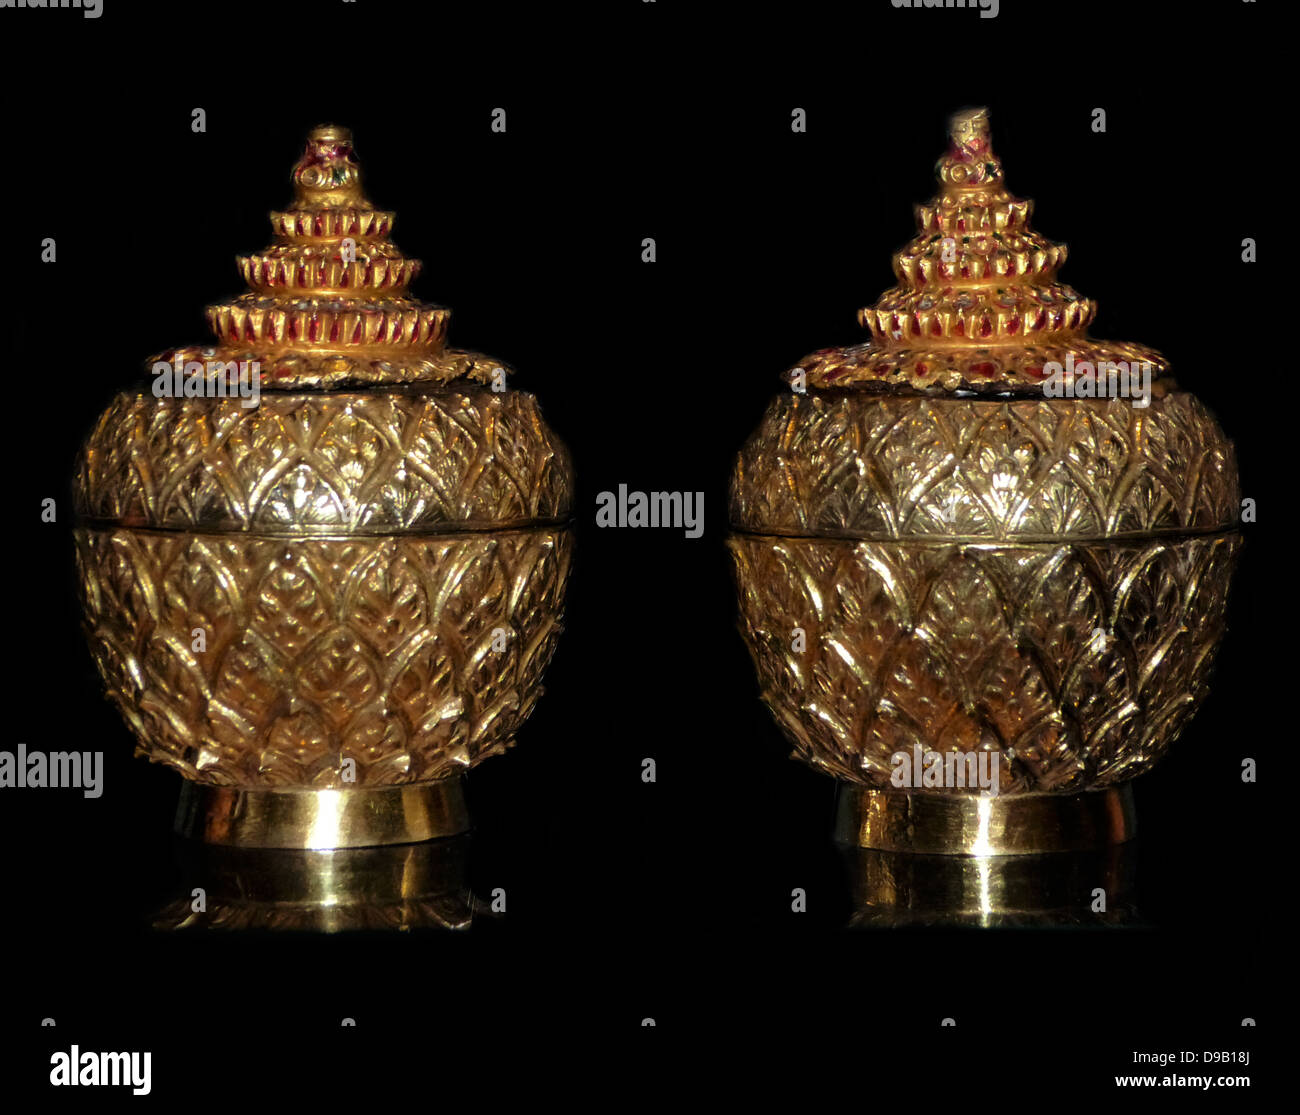 Thai gold metalwork objects probaly part of a Buddhist ritual Stock Photo